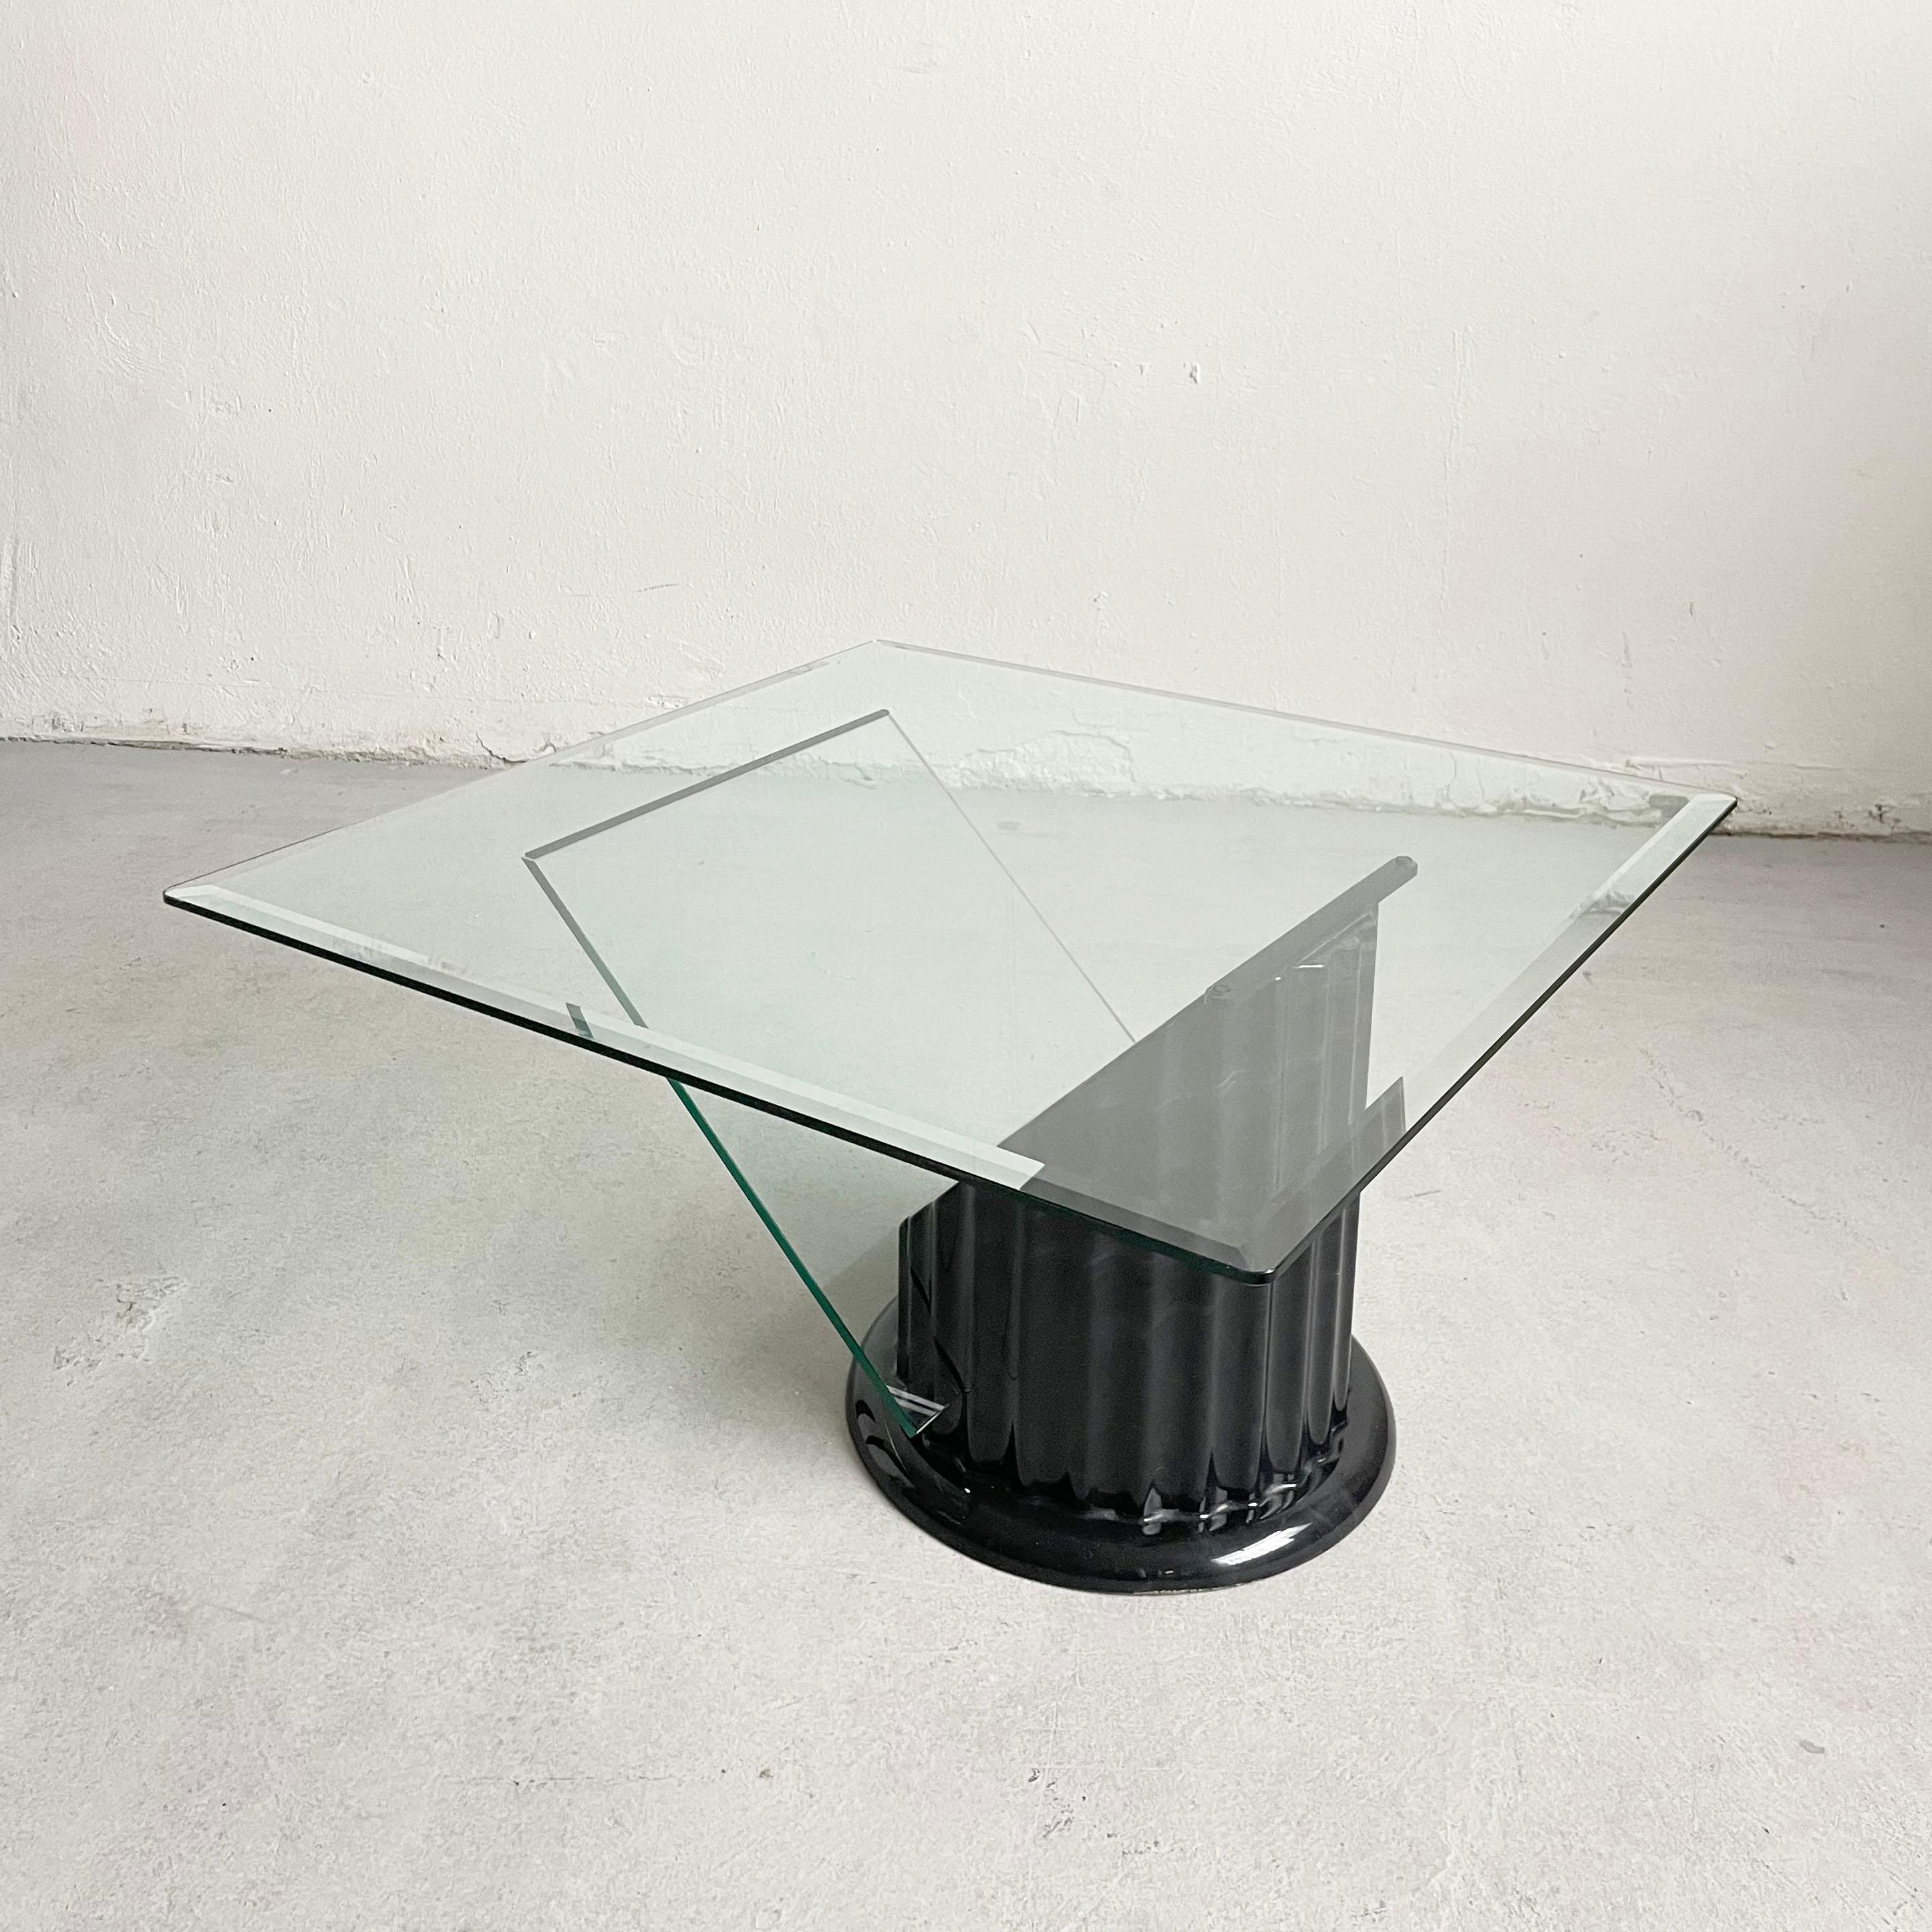 Postmodern clear glass coffee table from the 1980s

Beautiful contemporary reinterpretation of classical form 

Sculptural base of the table is made of faux marble. 

The table is in great vintage condition. Glass shows minimal wear marks (small,